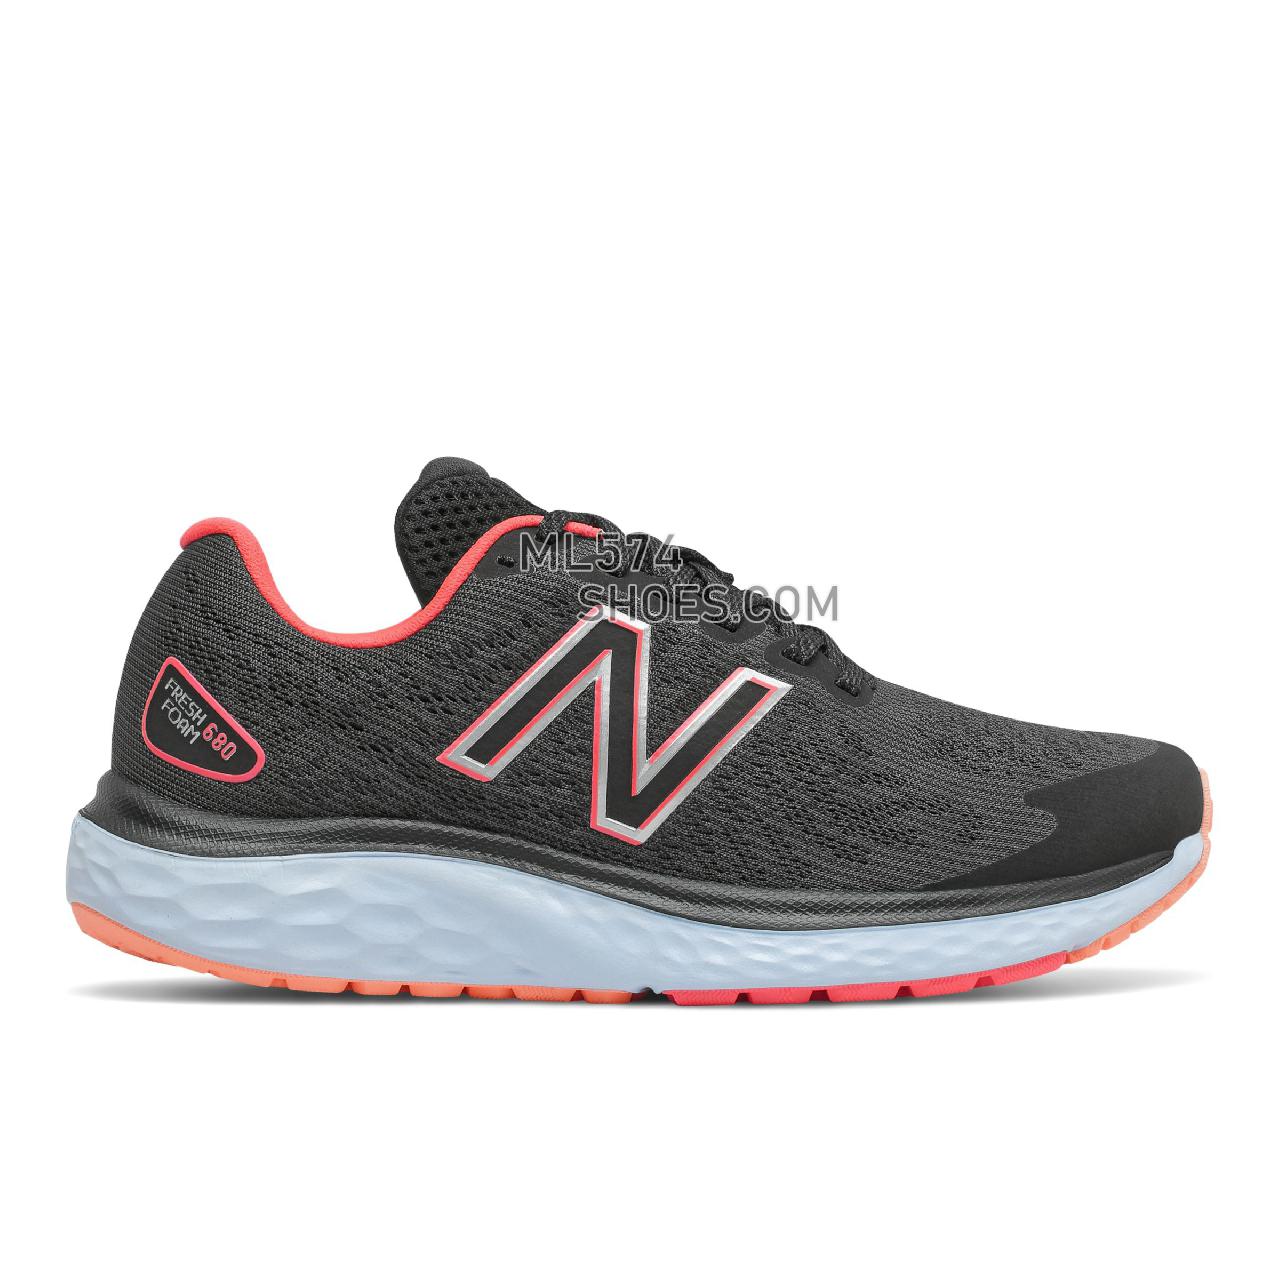 New Balance Fresh Foam 680v7 - Women's Neutral Running - Black with vivid coral and citrus punch - W680LF7